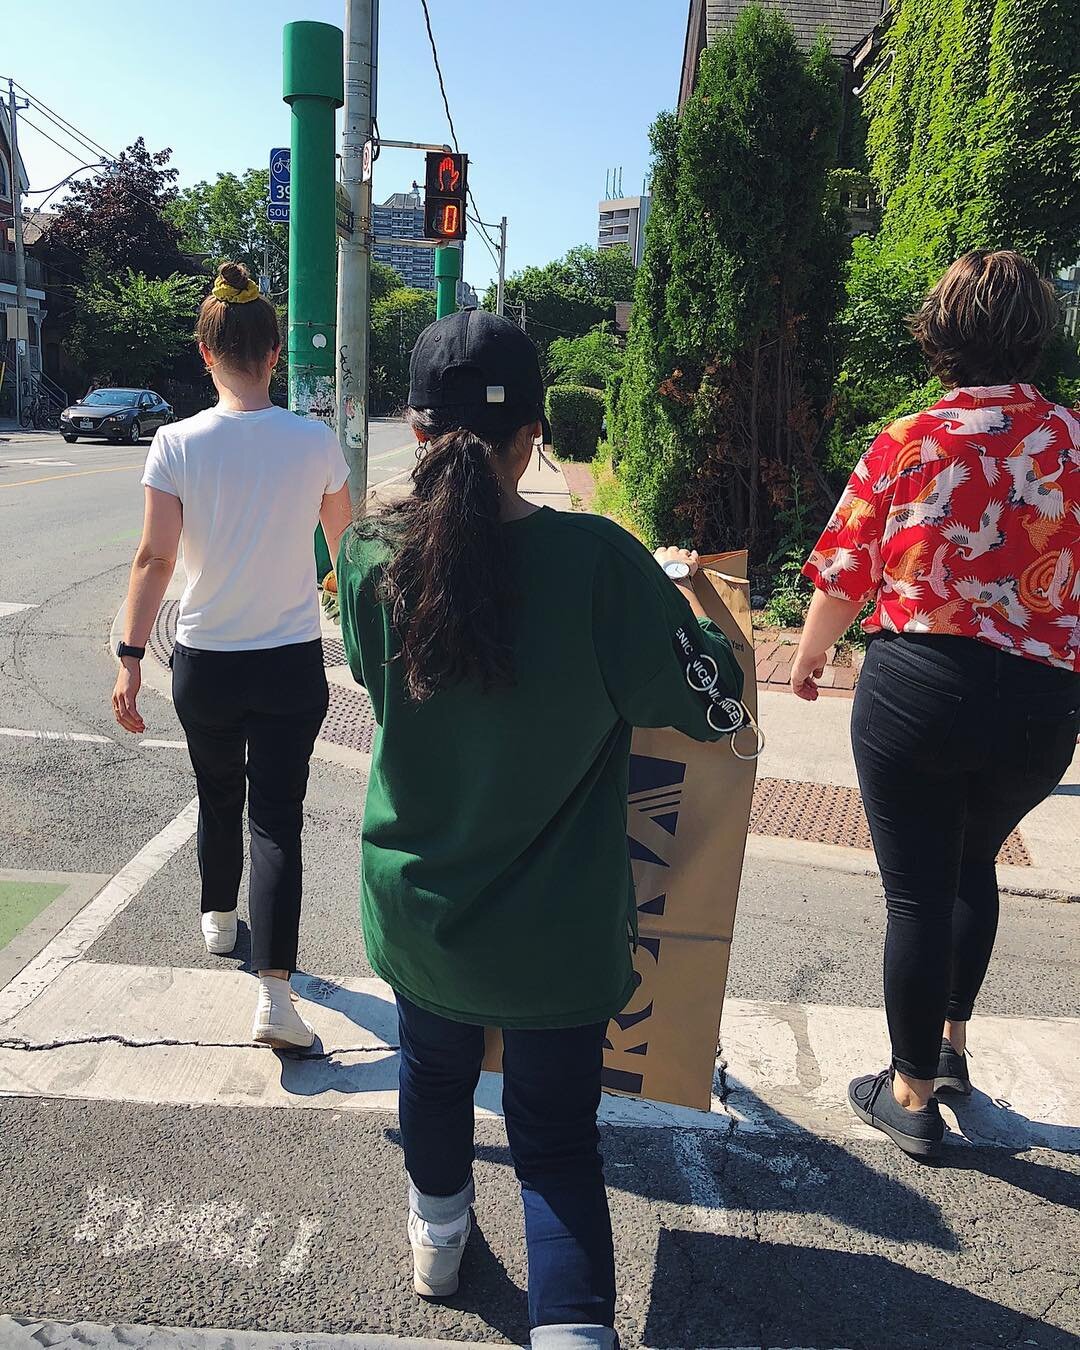 To help make Toronto a litter-free community, Plant Life Apparel participates in monthly clean-ups! #litterfree #toronto